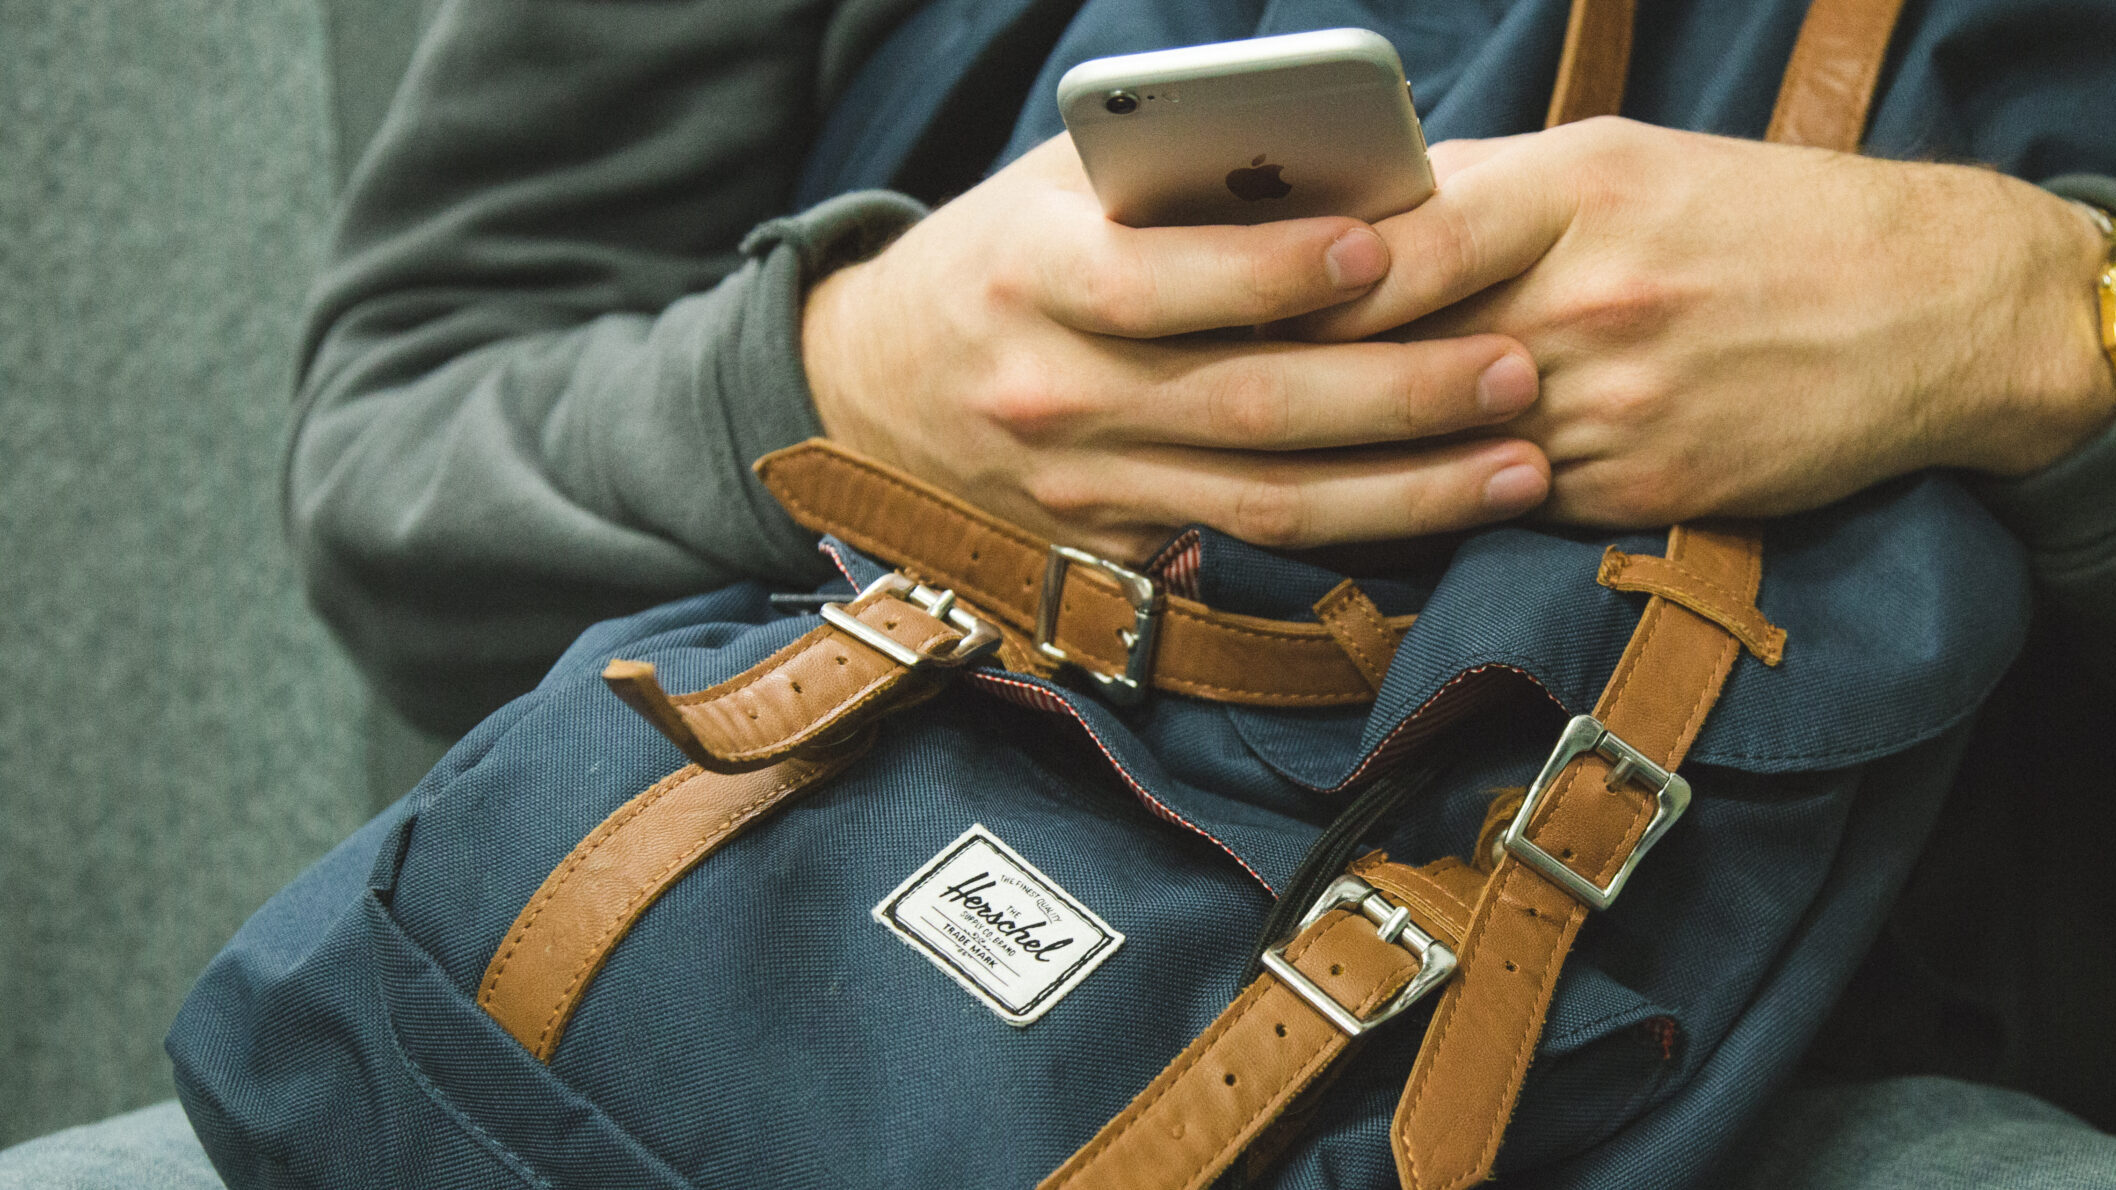 A man is holding a smartphone and a backpack whilst sitting in a chair.